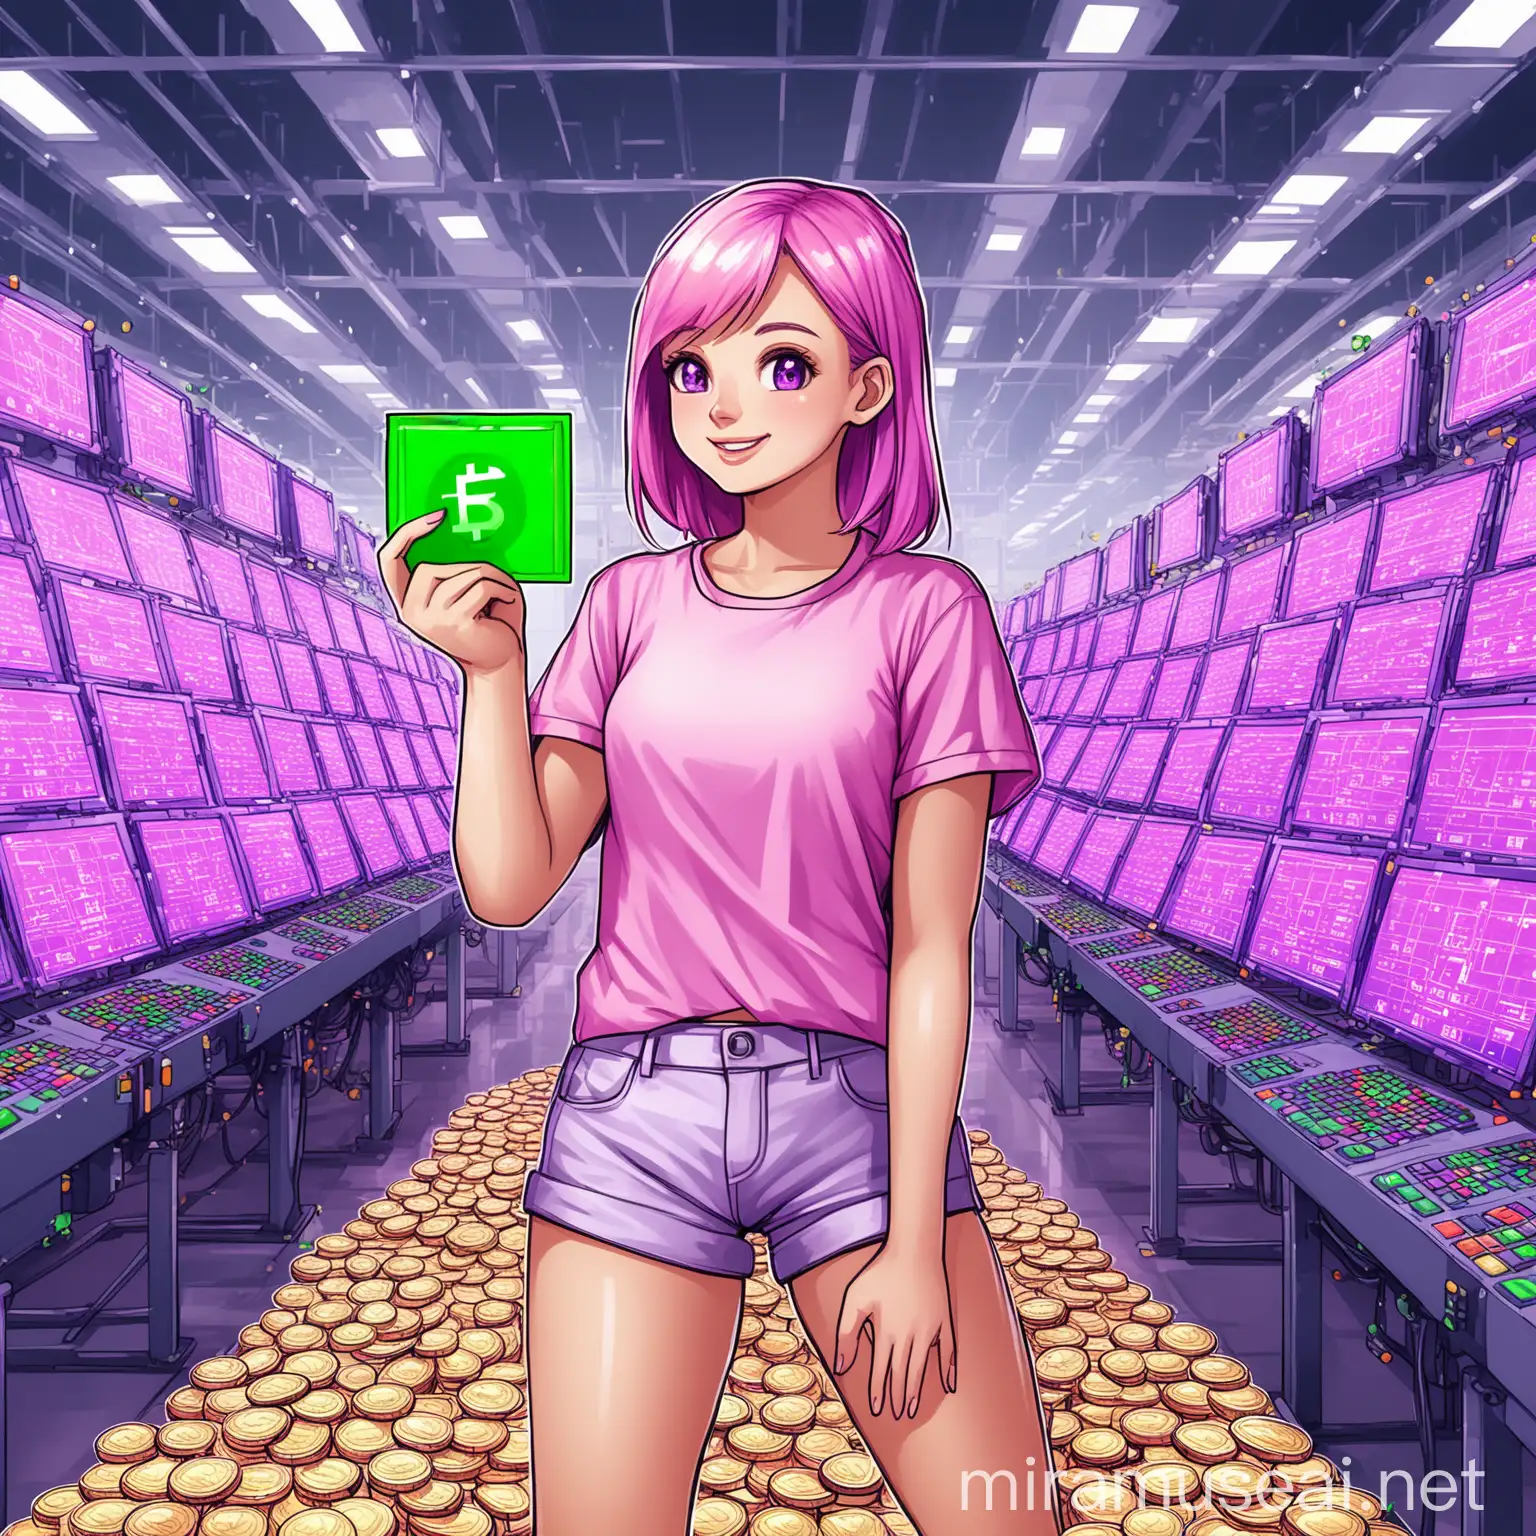 make a picture of big factory for earnings in cryptocurrency, and happy girl in shorts worked whem
use the colors pink green purple